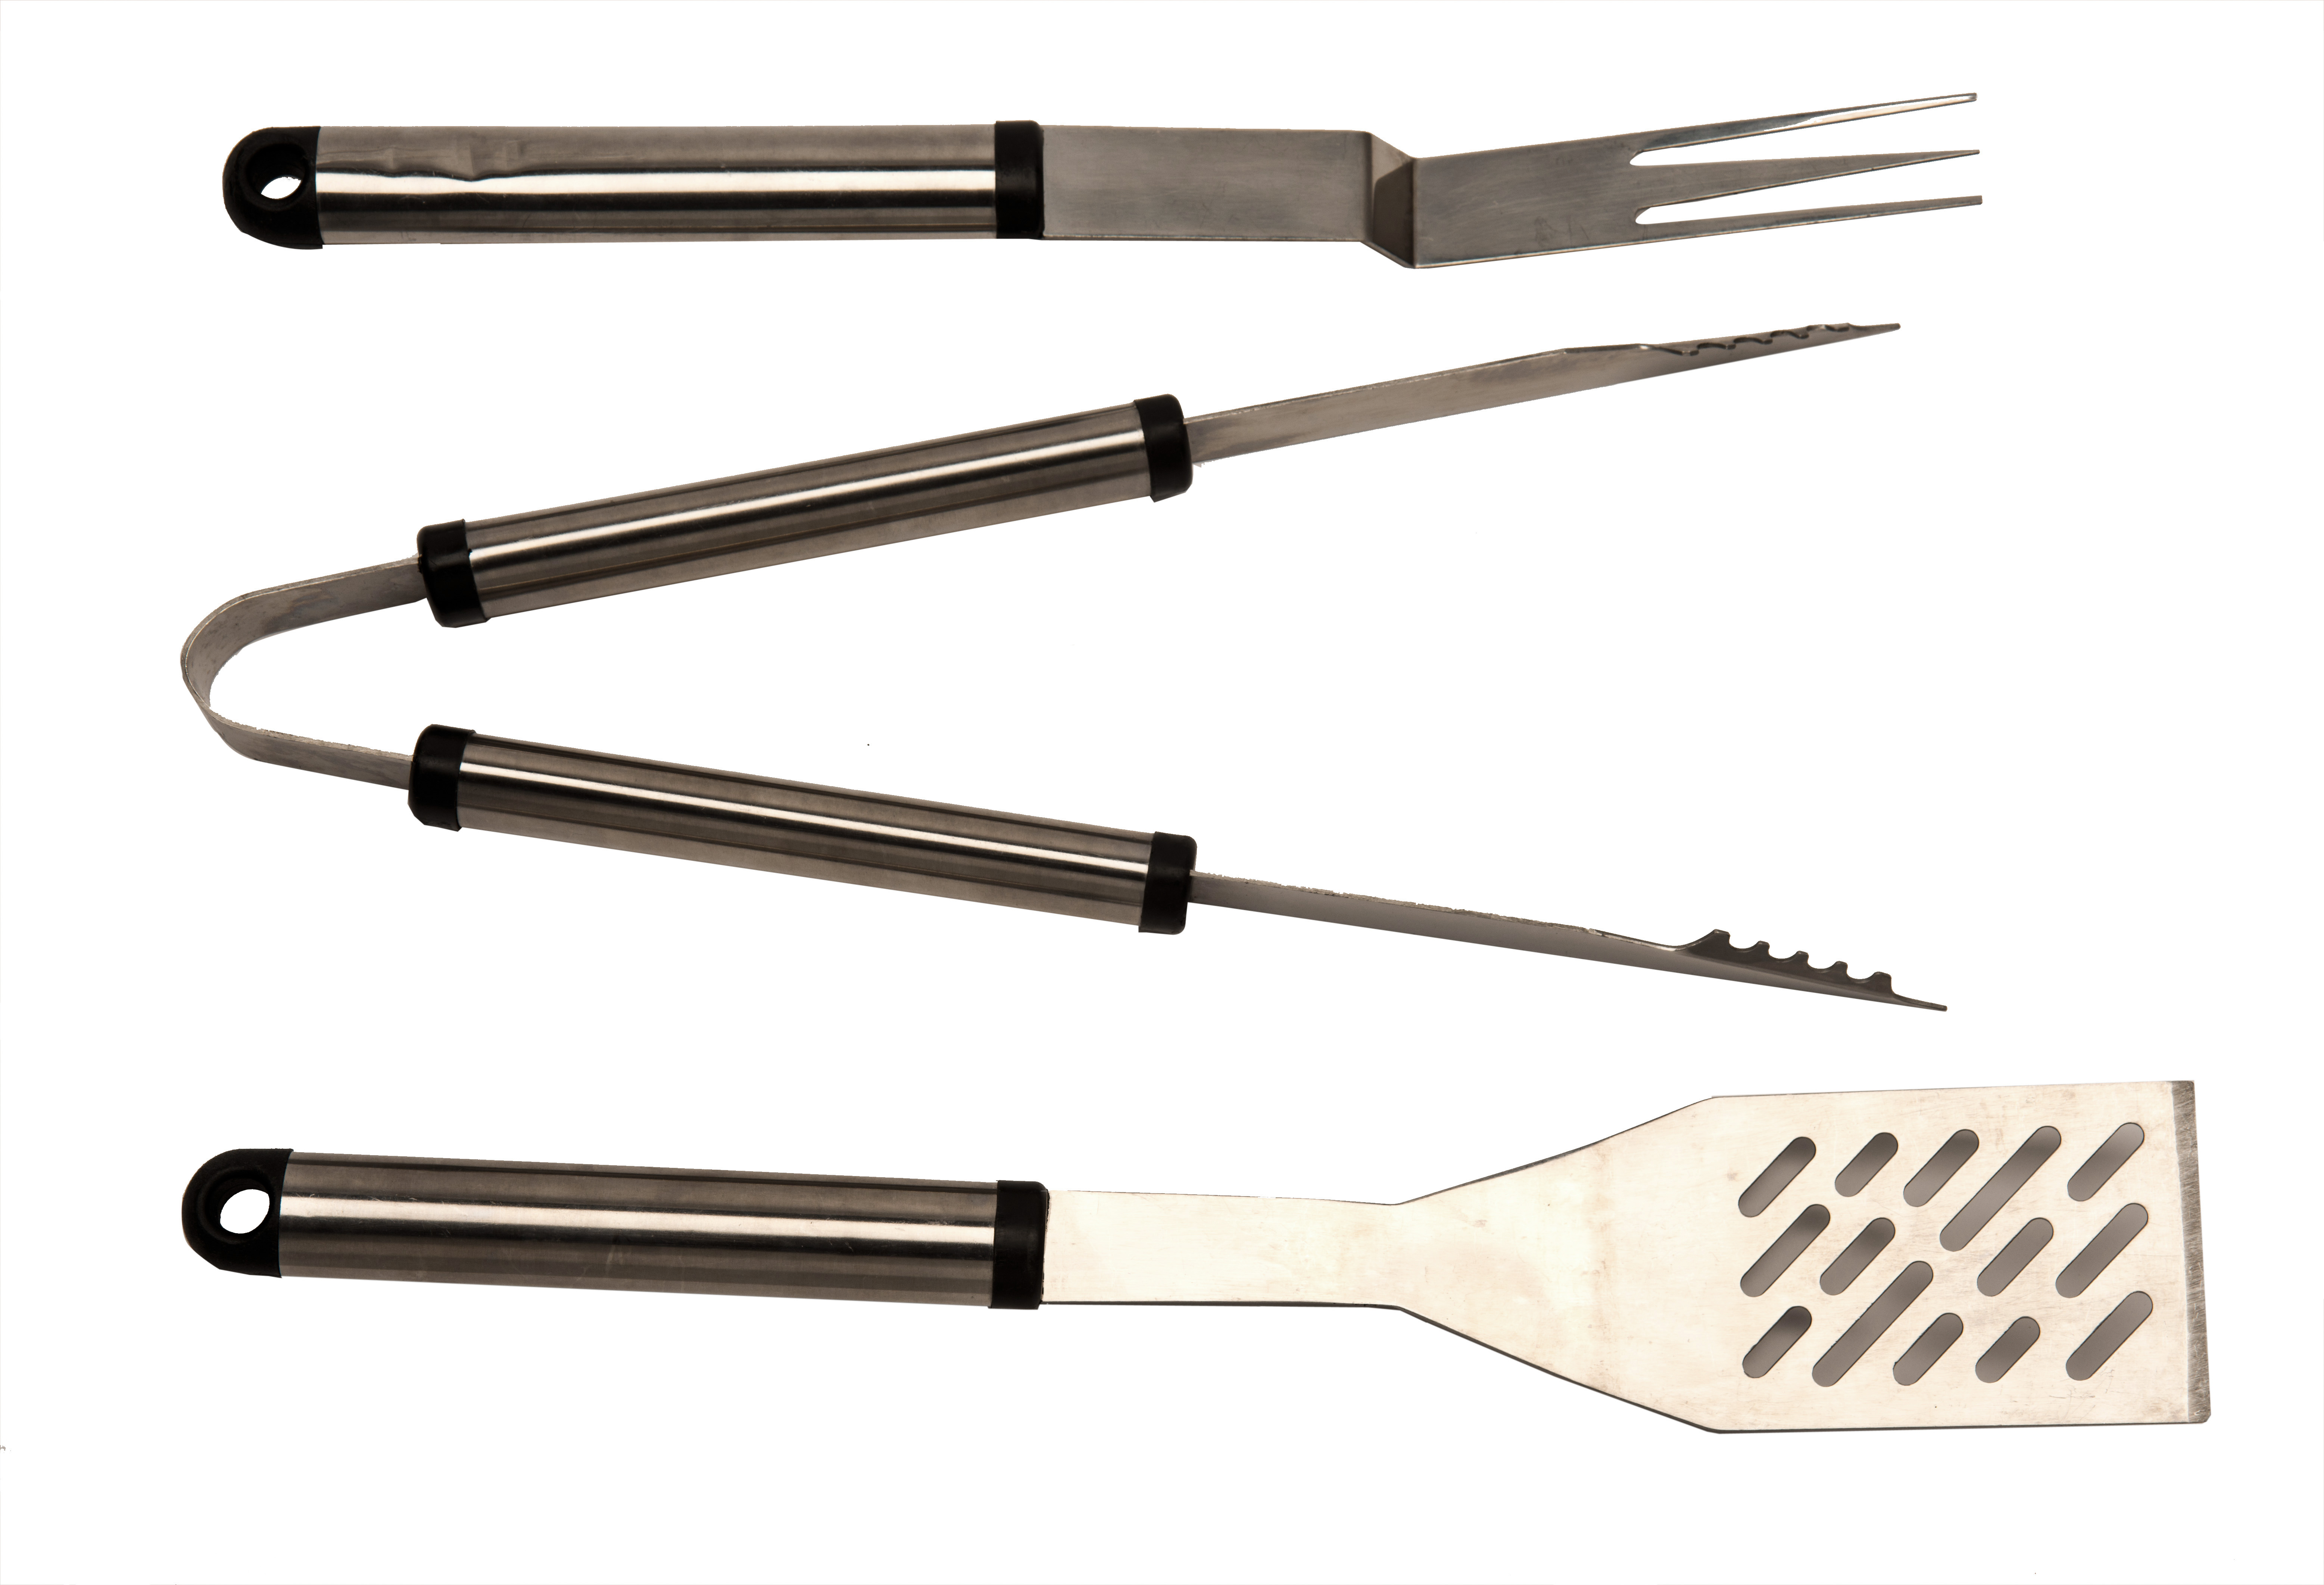 category_K1007 - Barbecue Tool Set